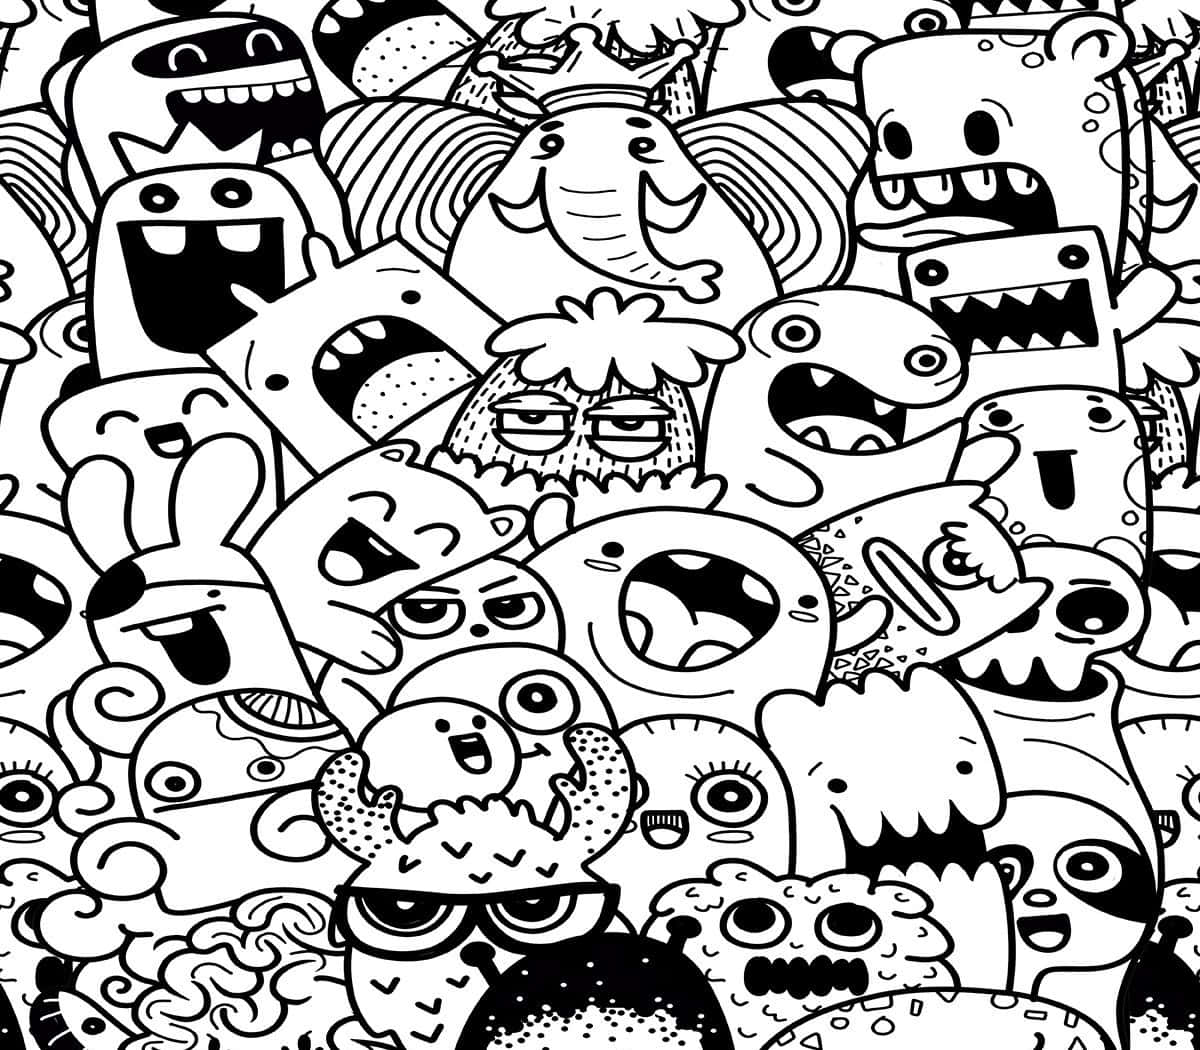 Download Doodle 1200 X 1050 Picture | Wallpapers.com